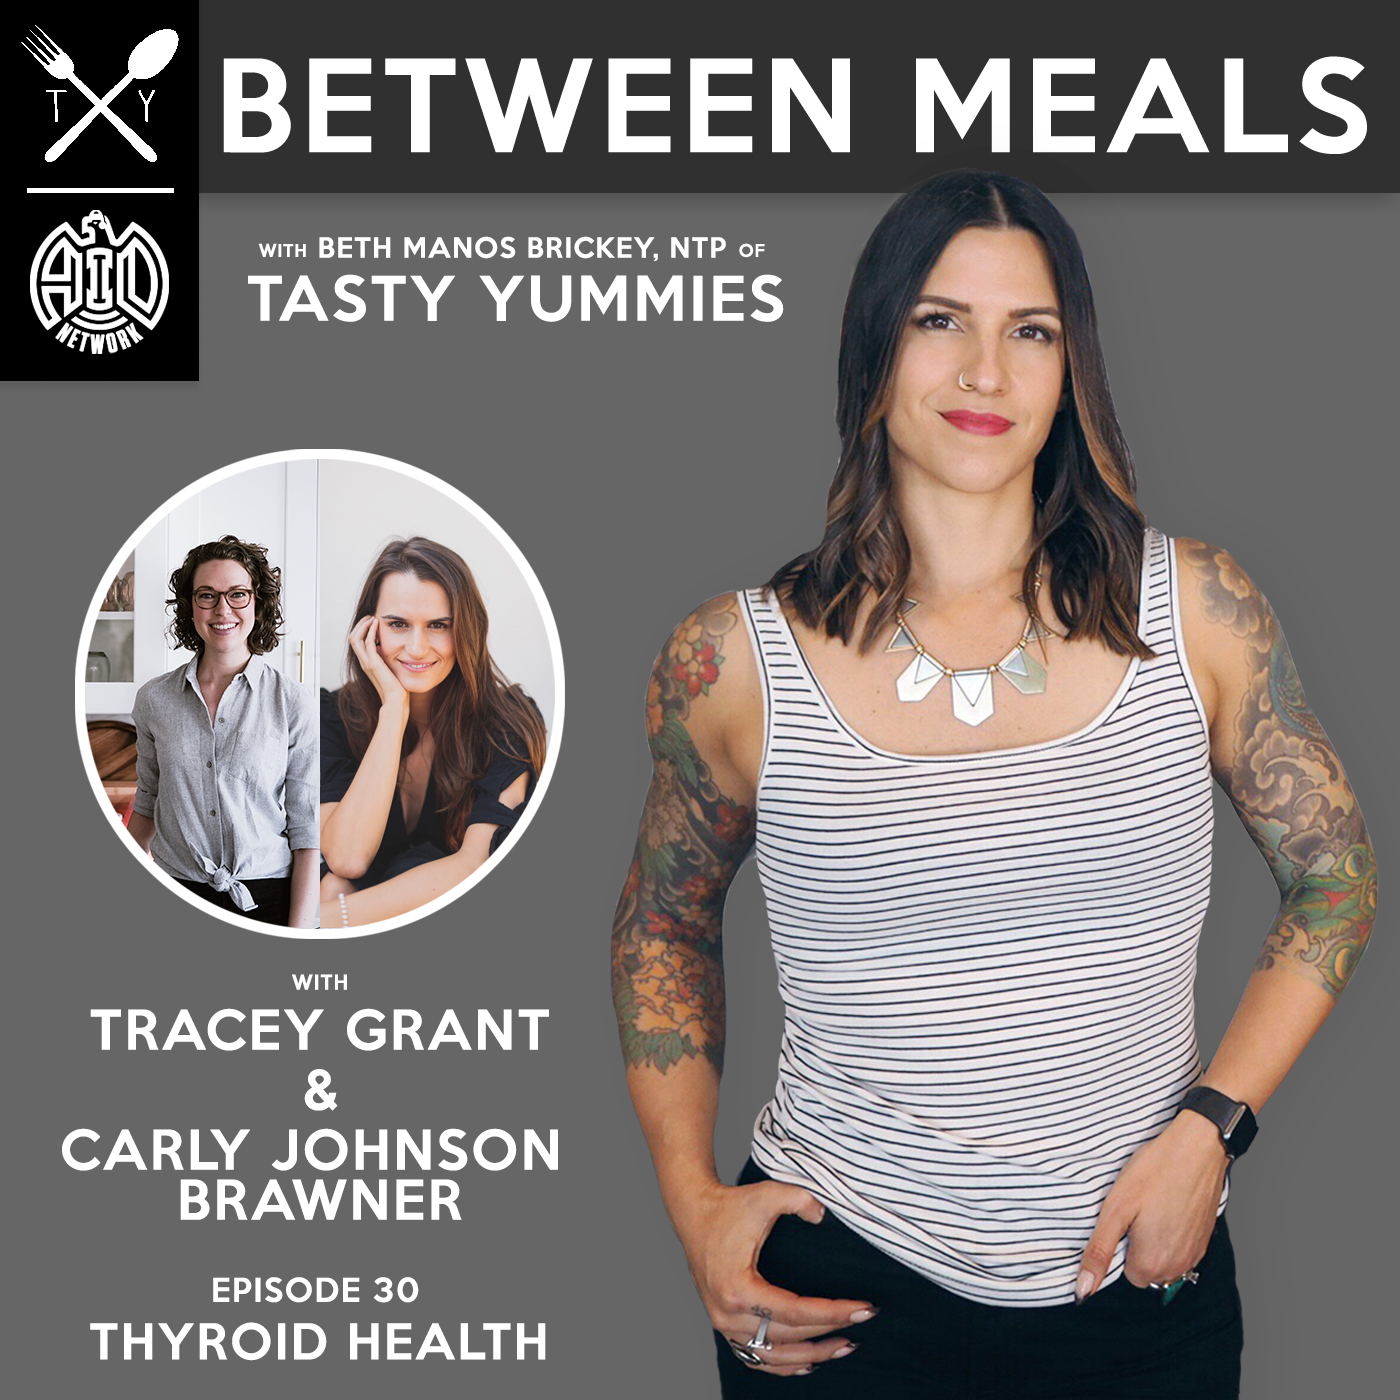 Between Meals Podcast. Episode 30: Thyroid Health and Healing Hashimoto’s